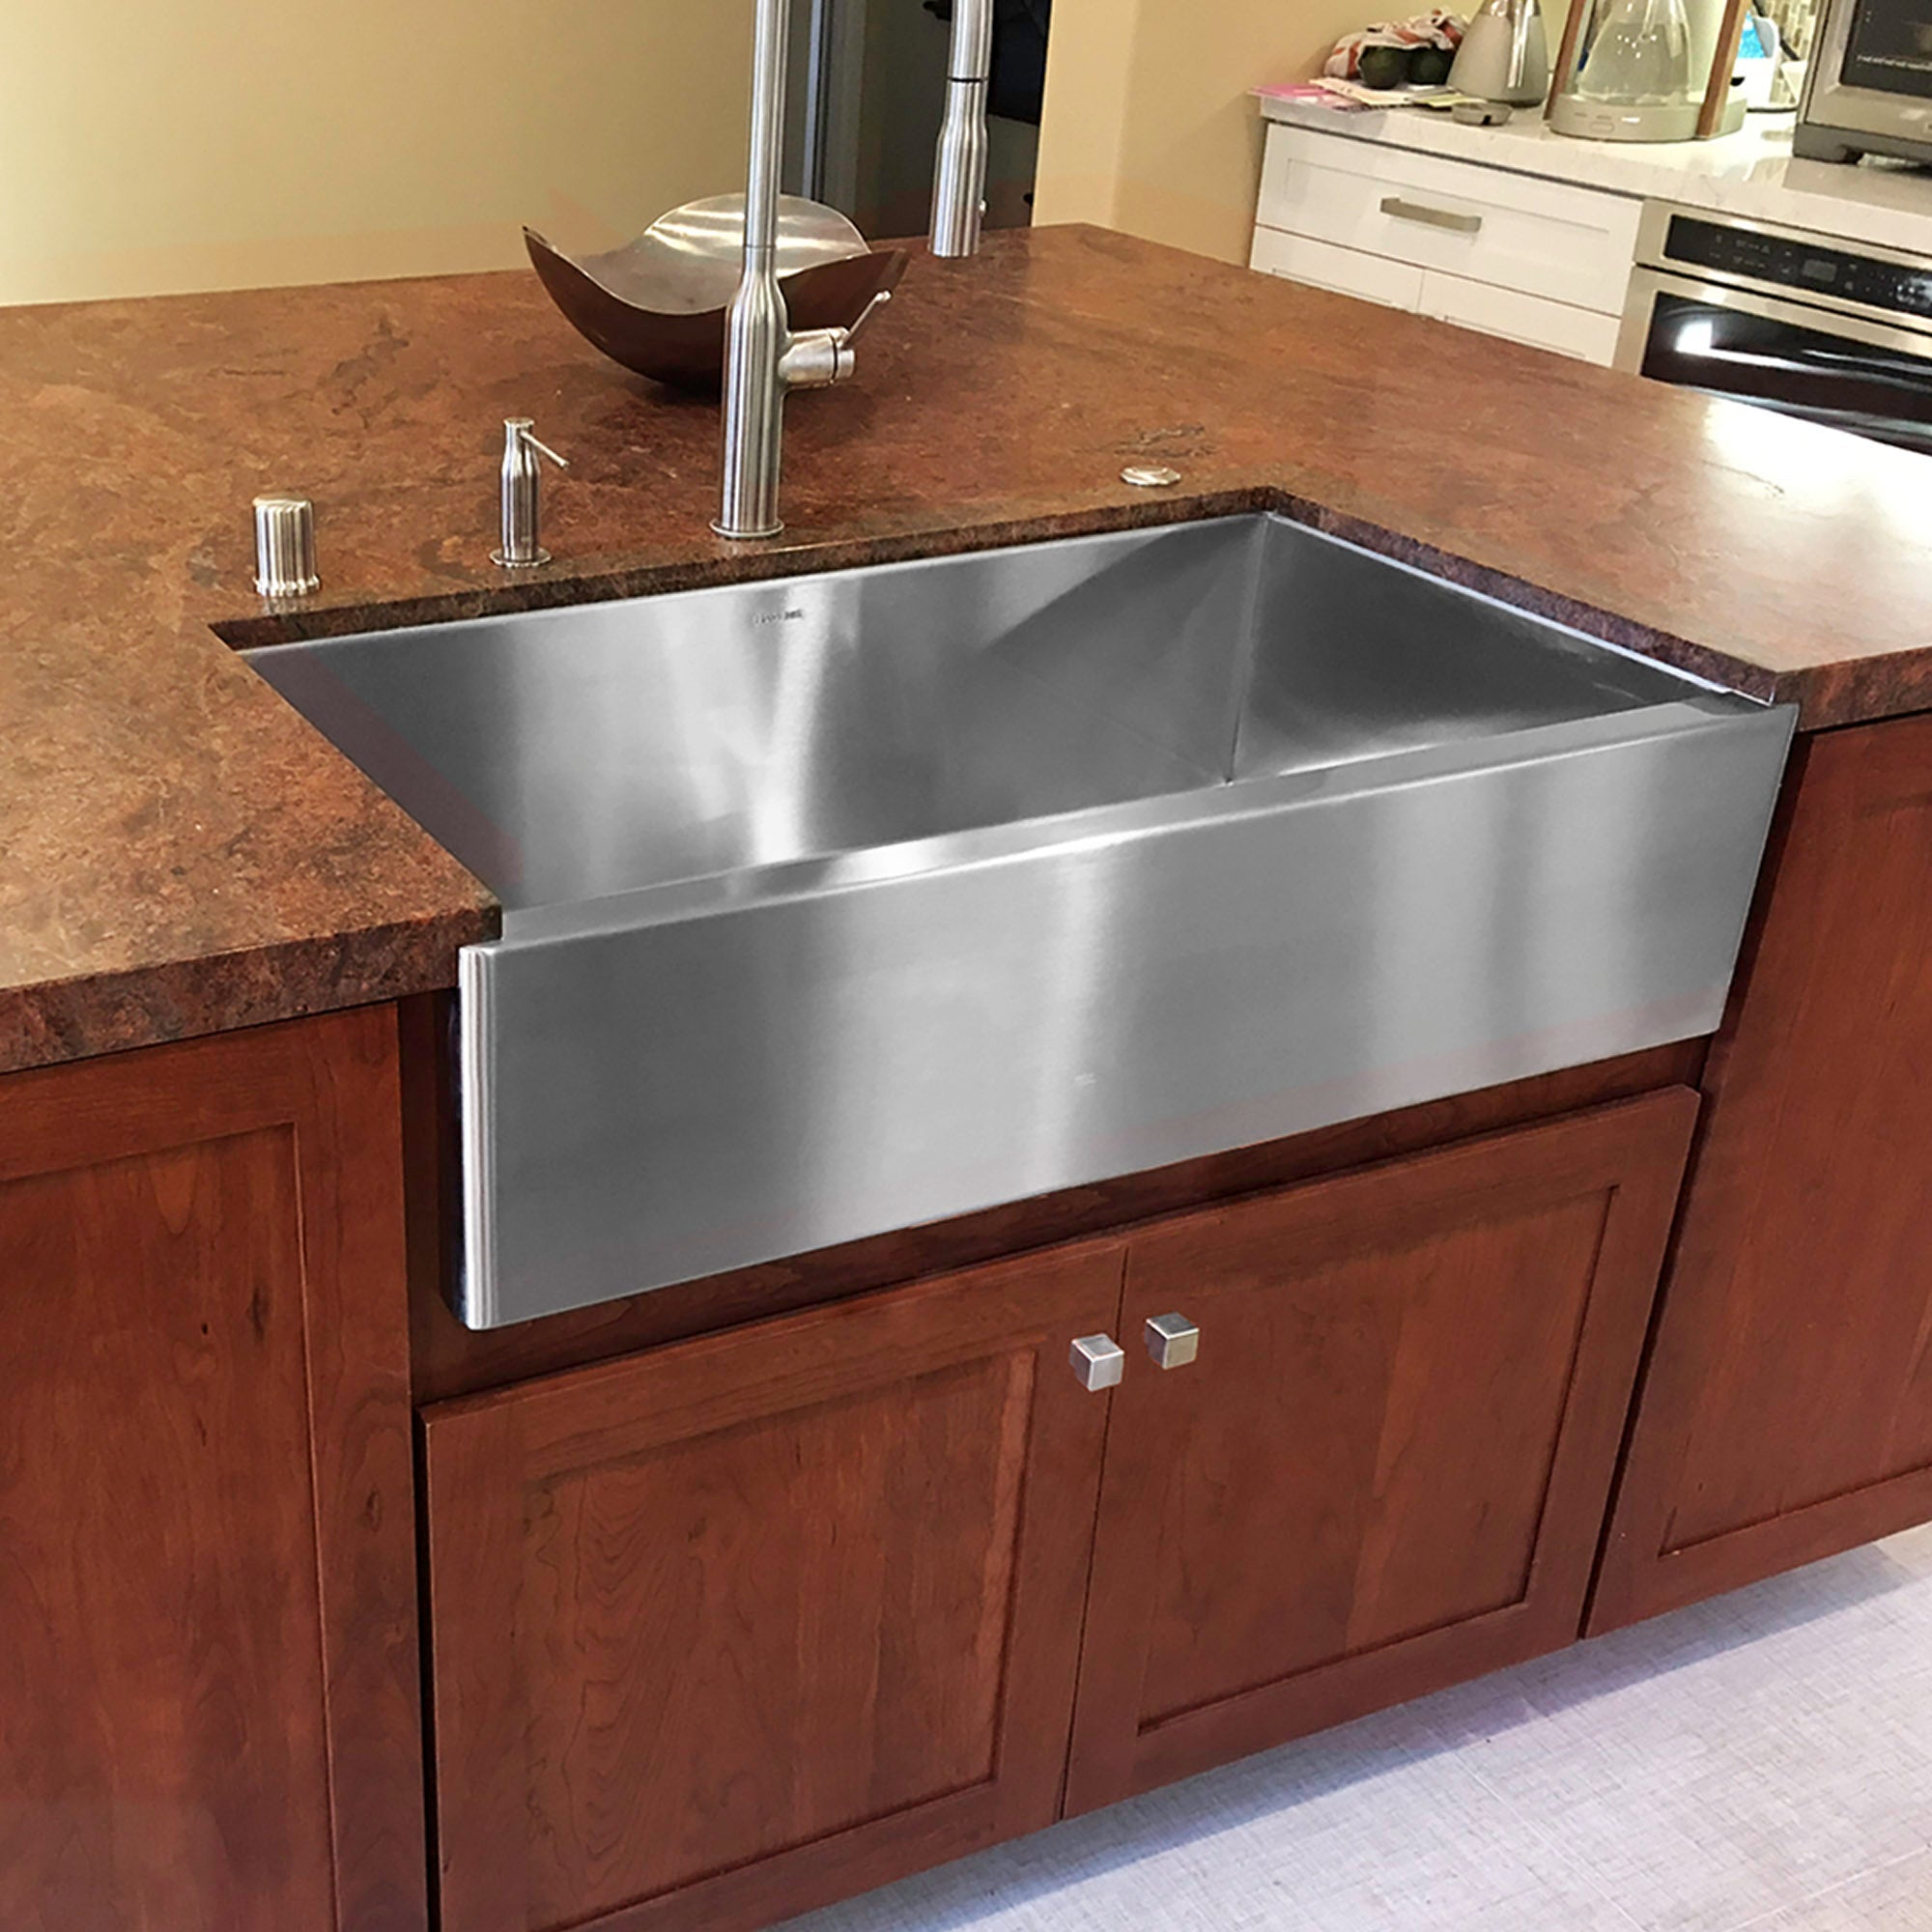 Heritage Farmhouse Sink - Luxe Stainless